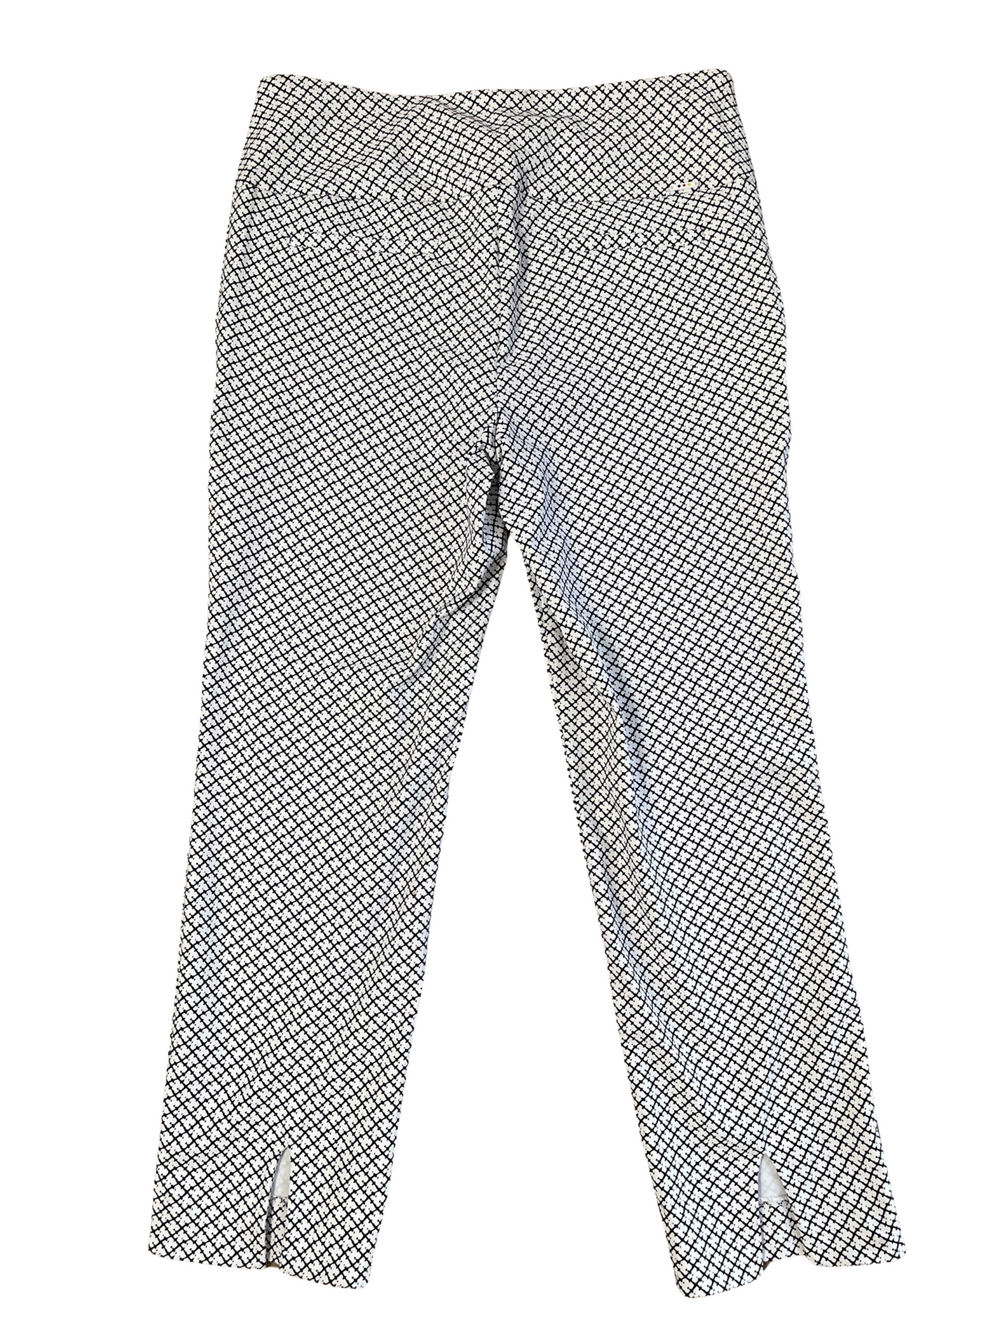 Swing Control Vented Airspun Ankle Pant - Criss Cross - Size 6 - Skorzie